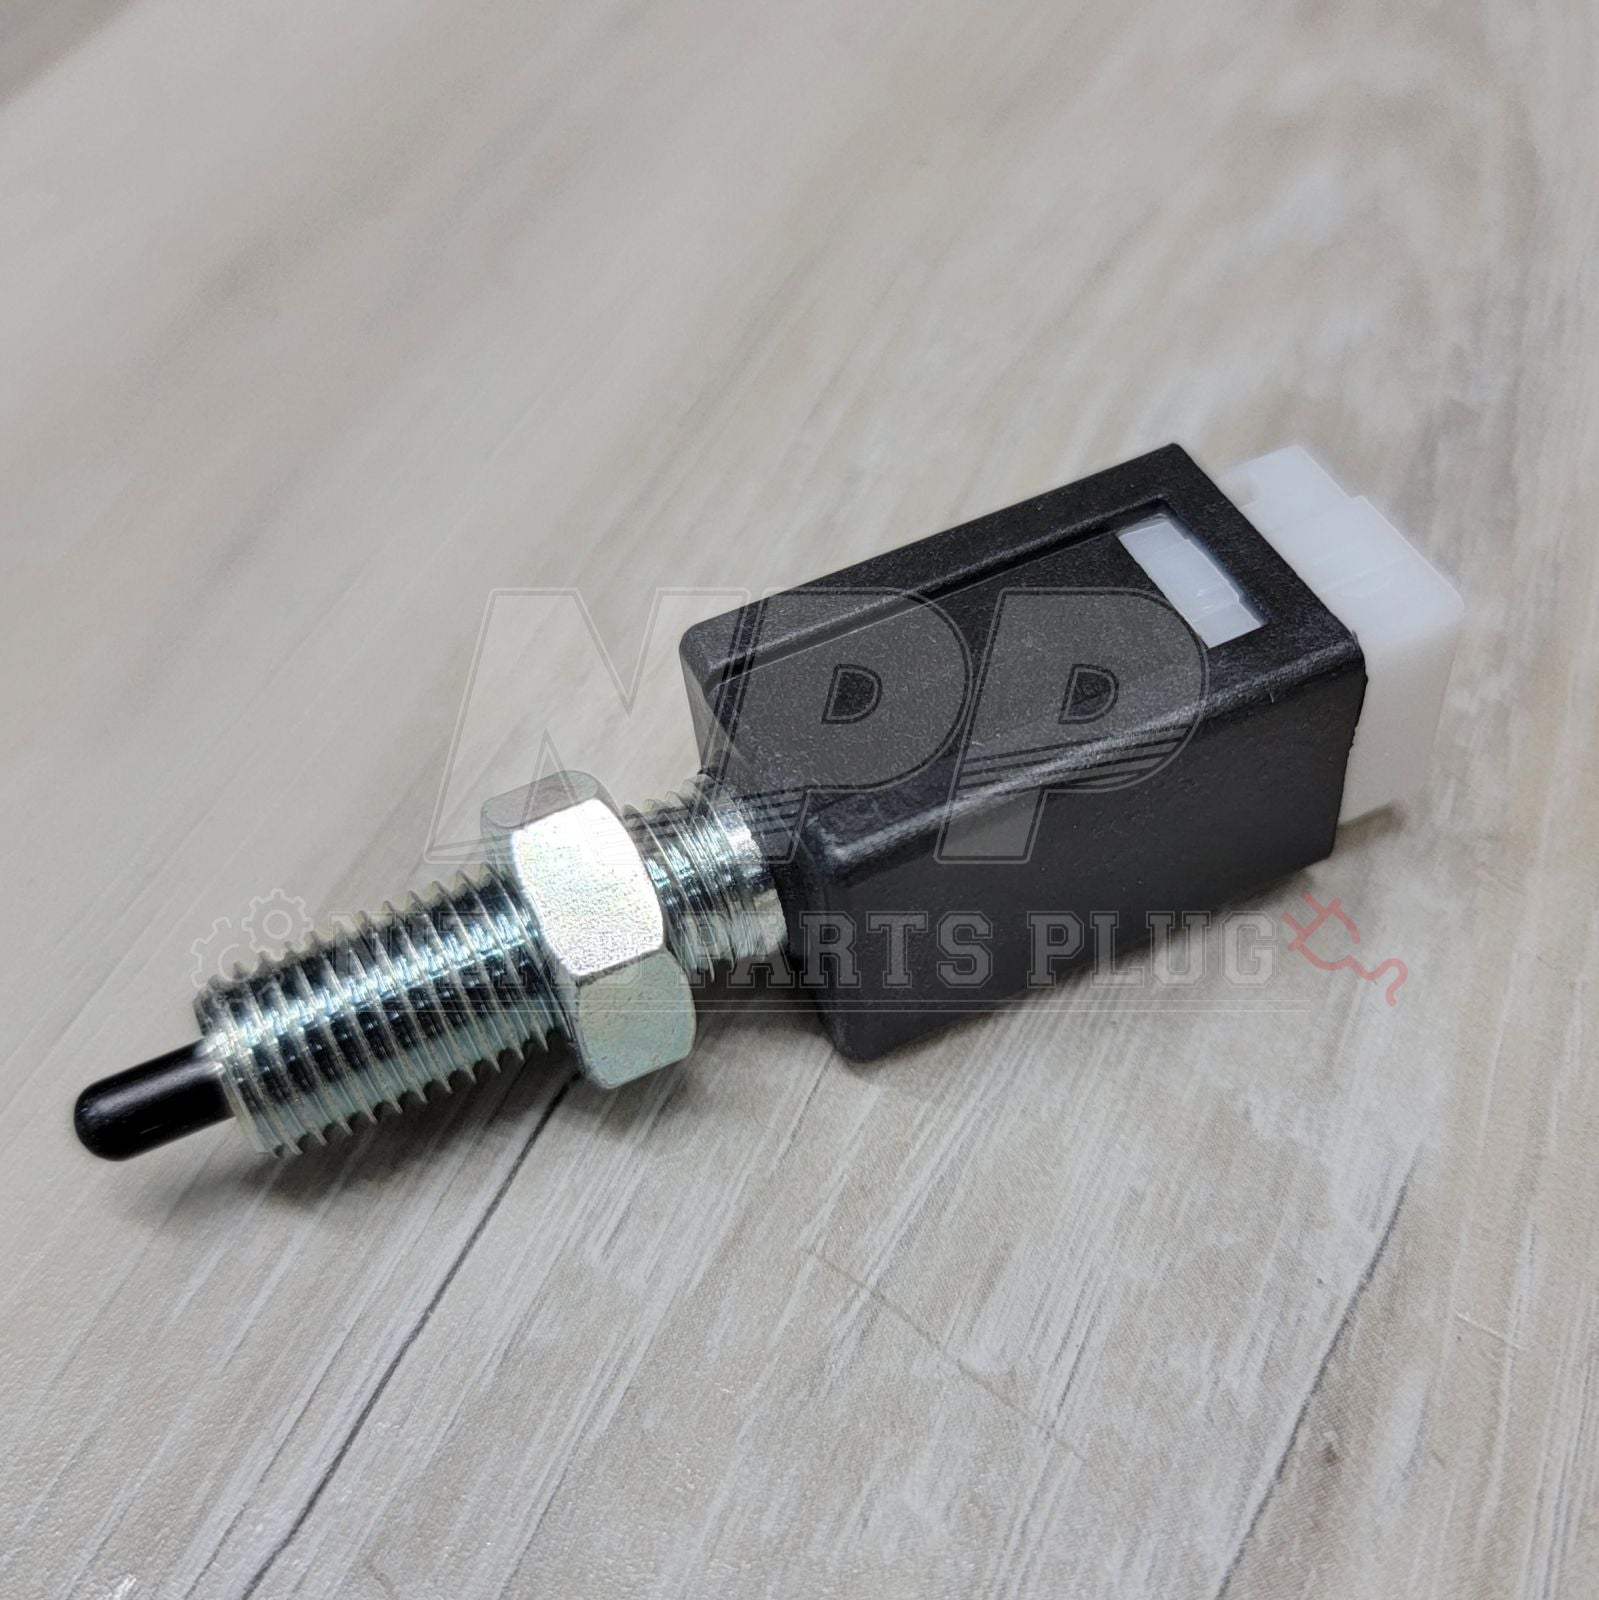 S14 Nissan 240SX Clutch Pedal Position Switch